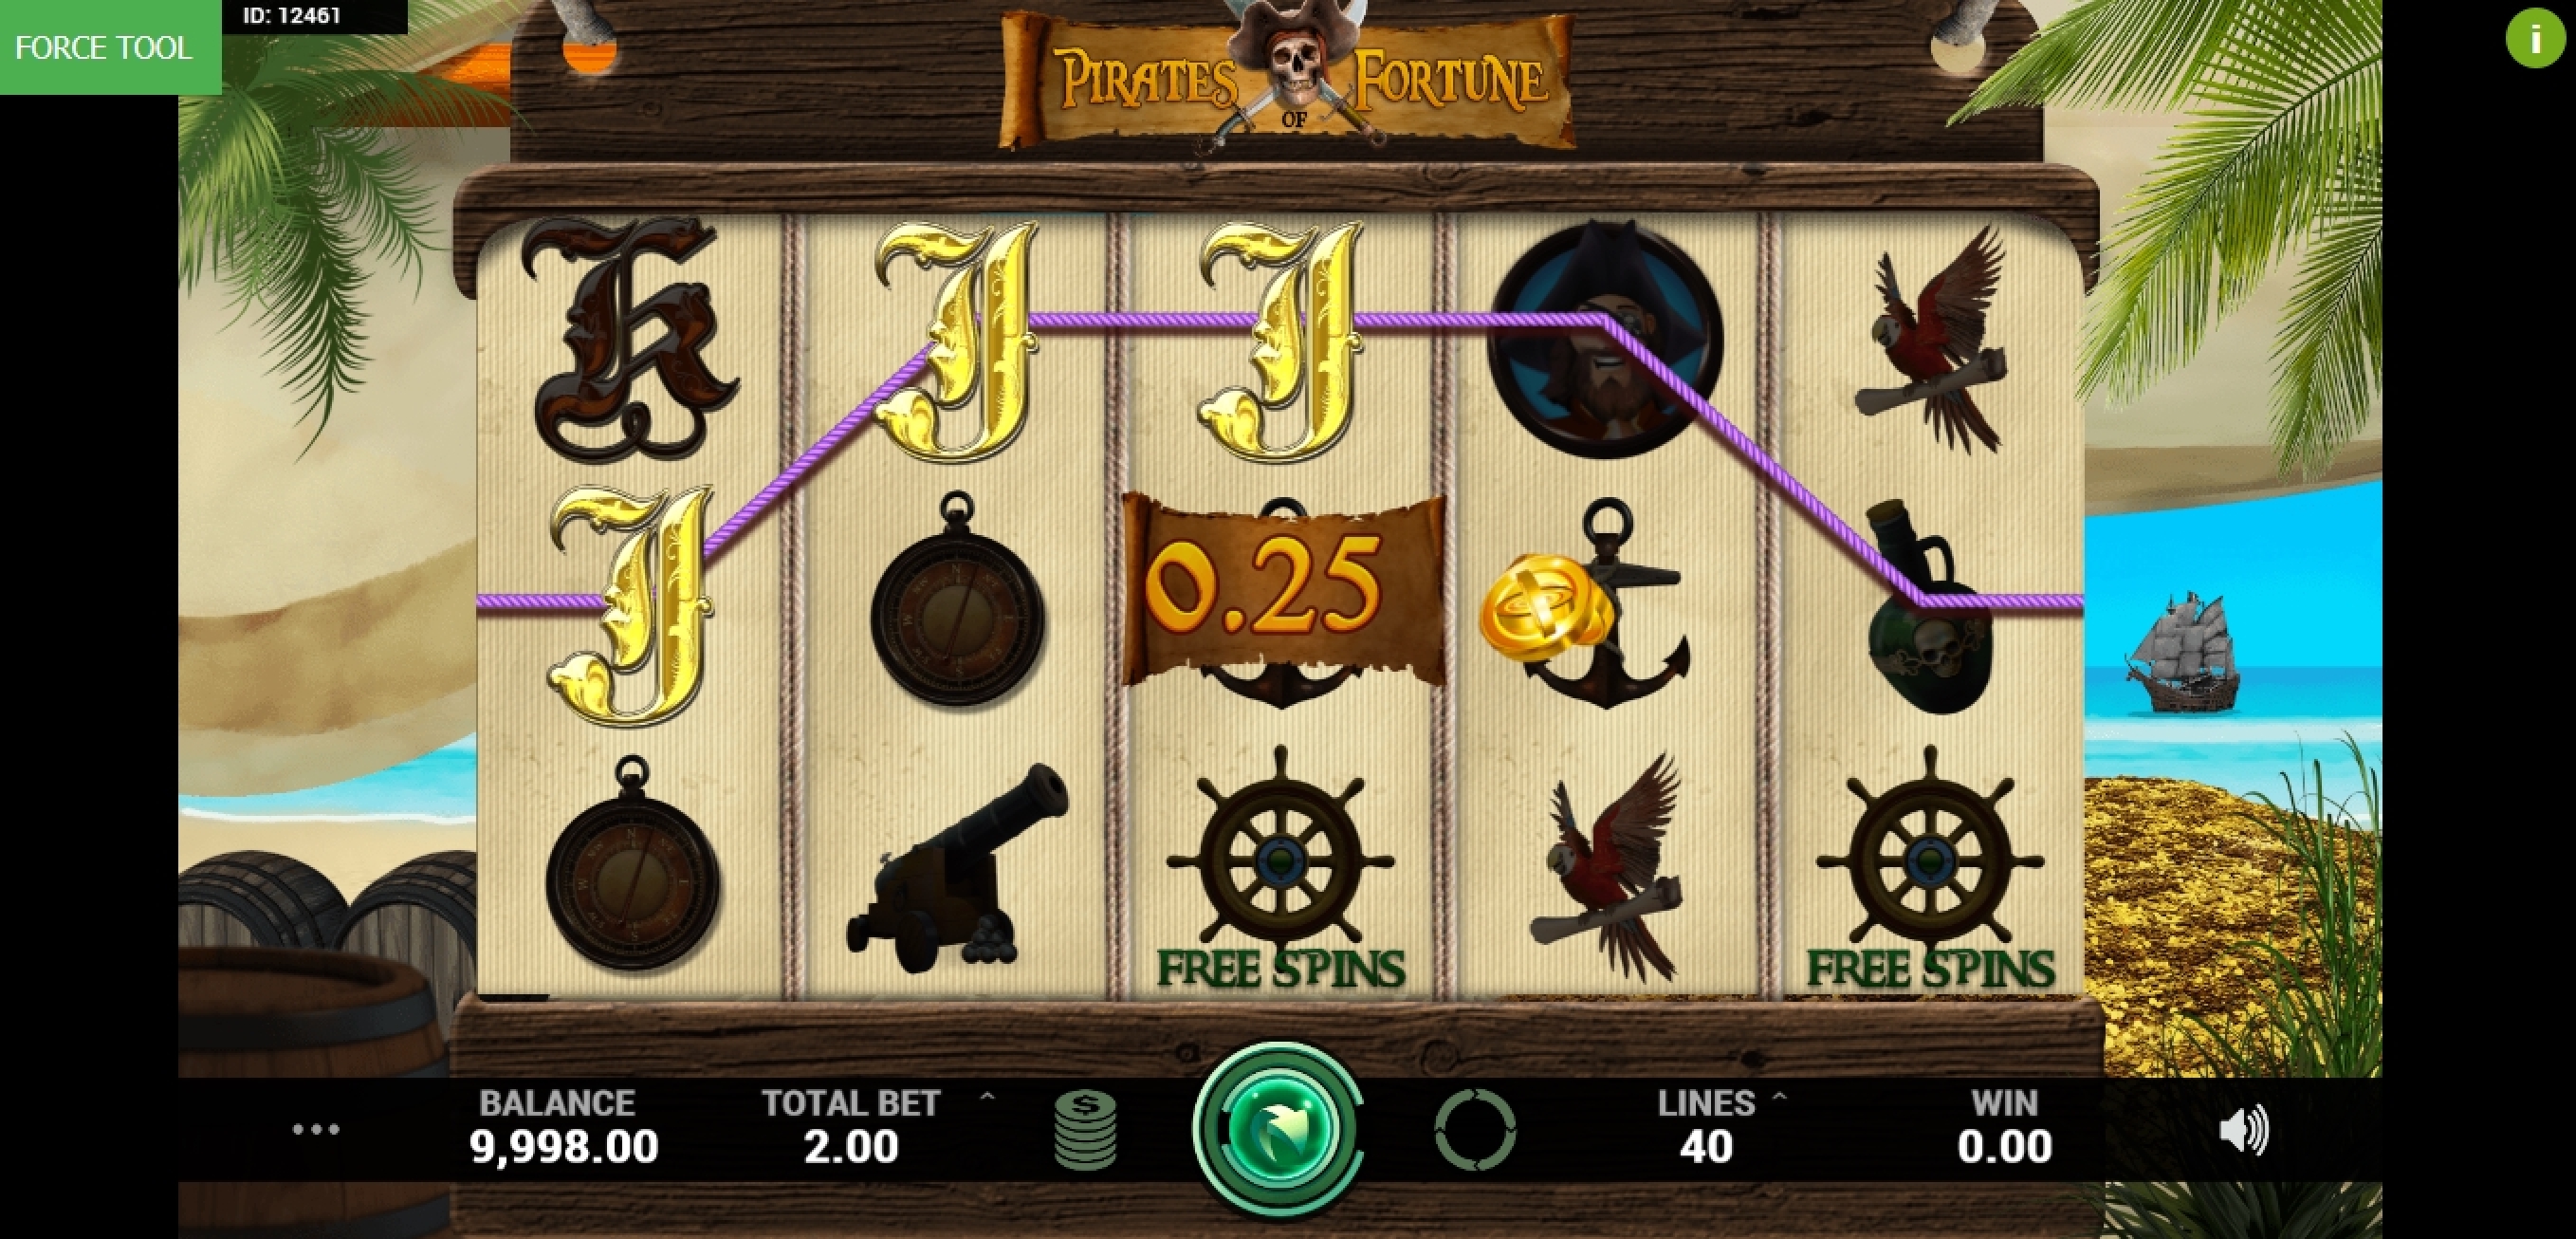 Win Money in Pirates of Fortune Free Slot Game by Caleta Gaming